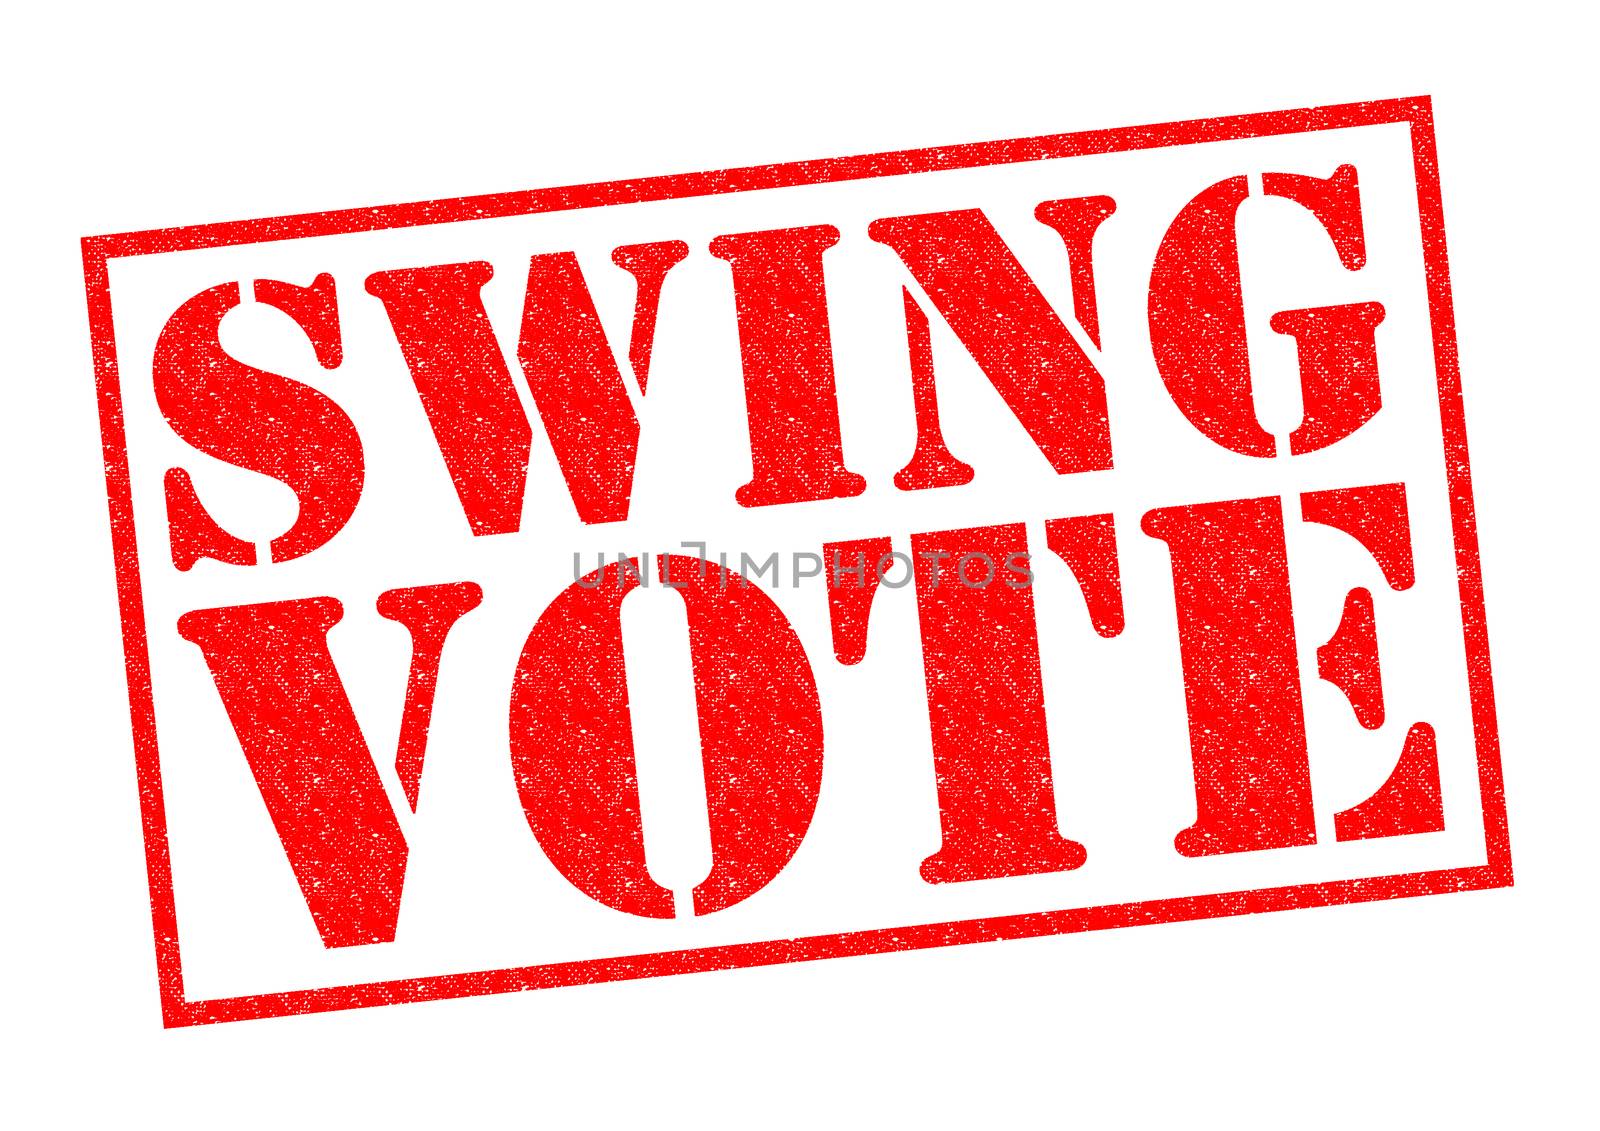 SWING VOTE red Rubber Stamp over a white background.